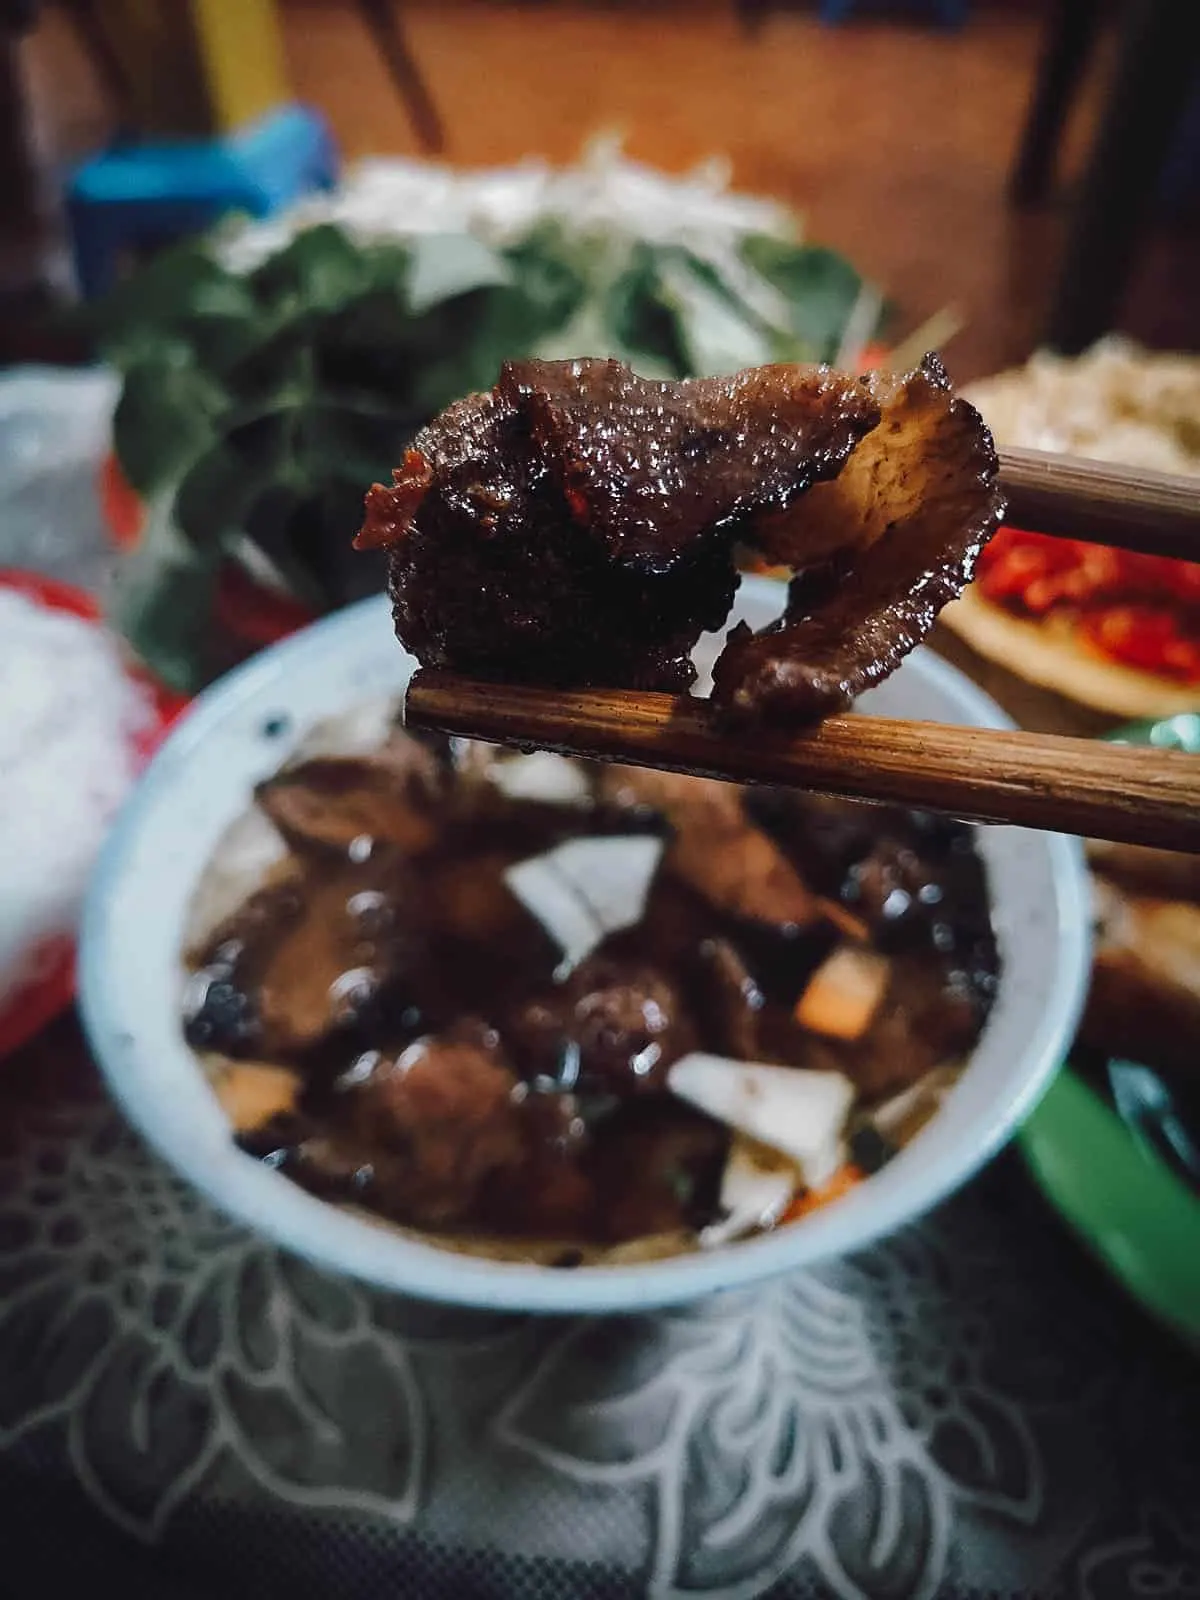 Bun cha in Hanoi, a tasty Vietnamese dish made with rice noodles and grilled pork